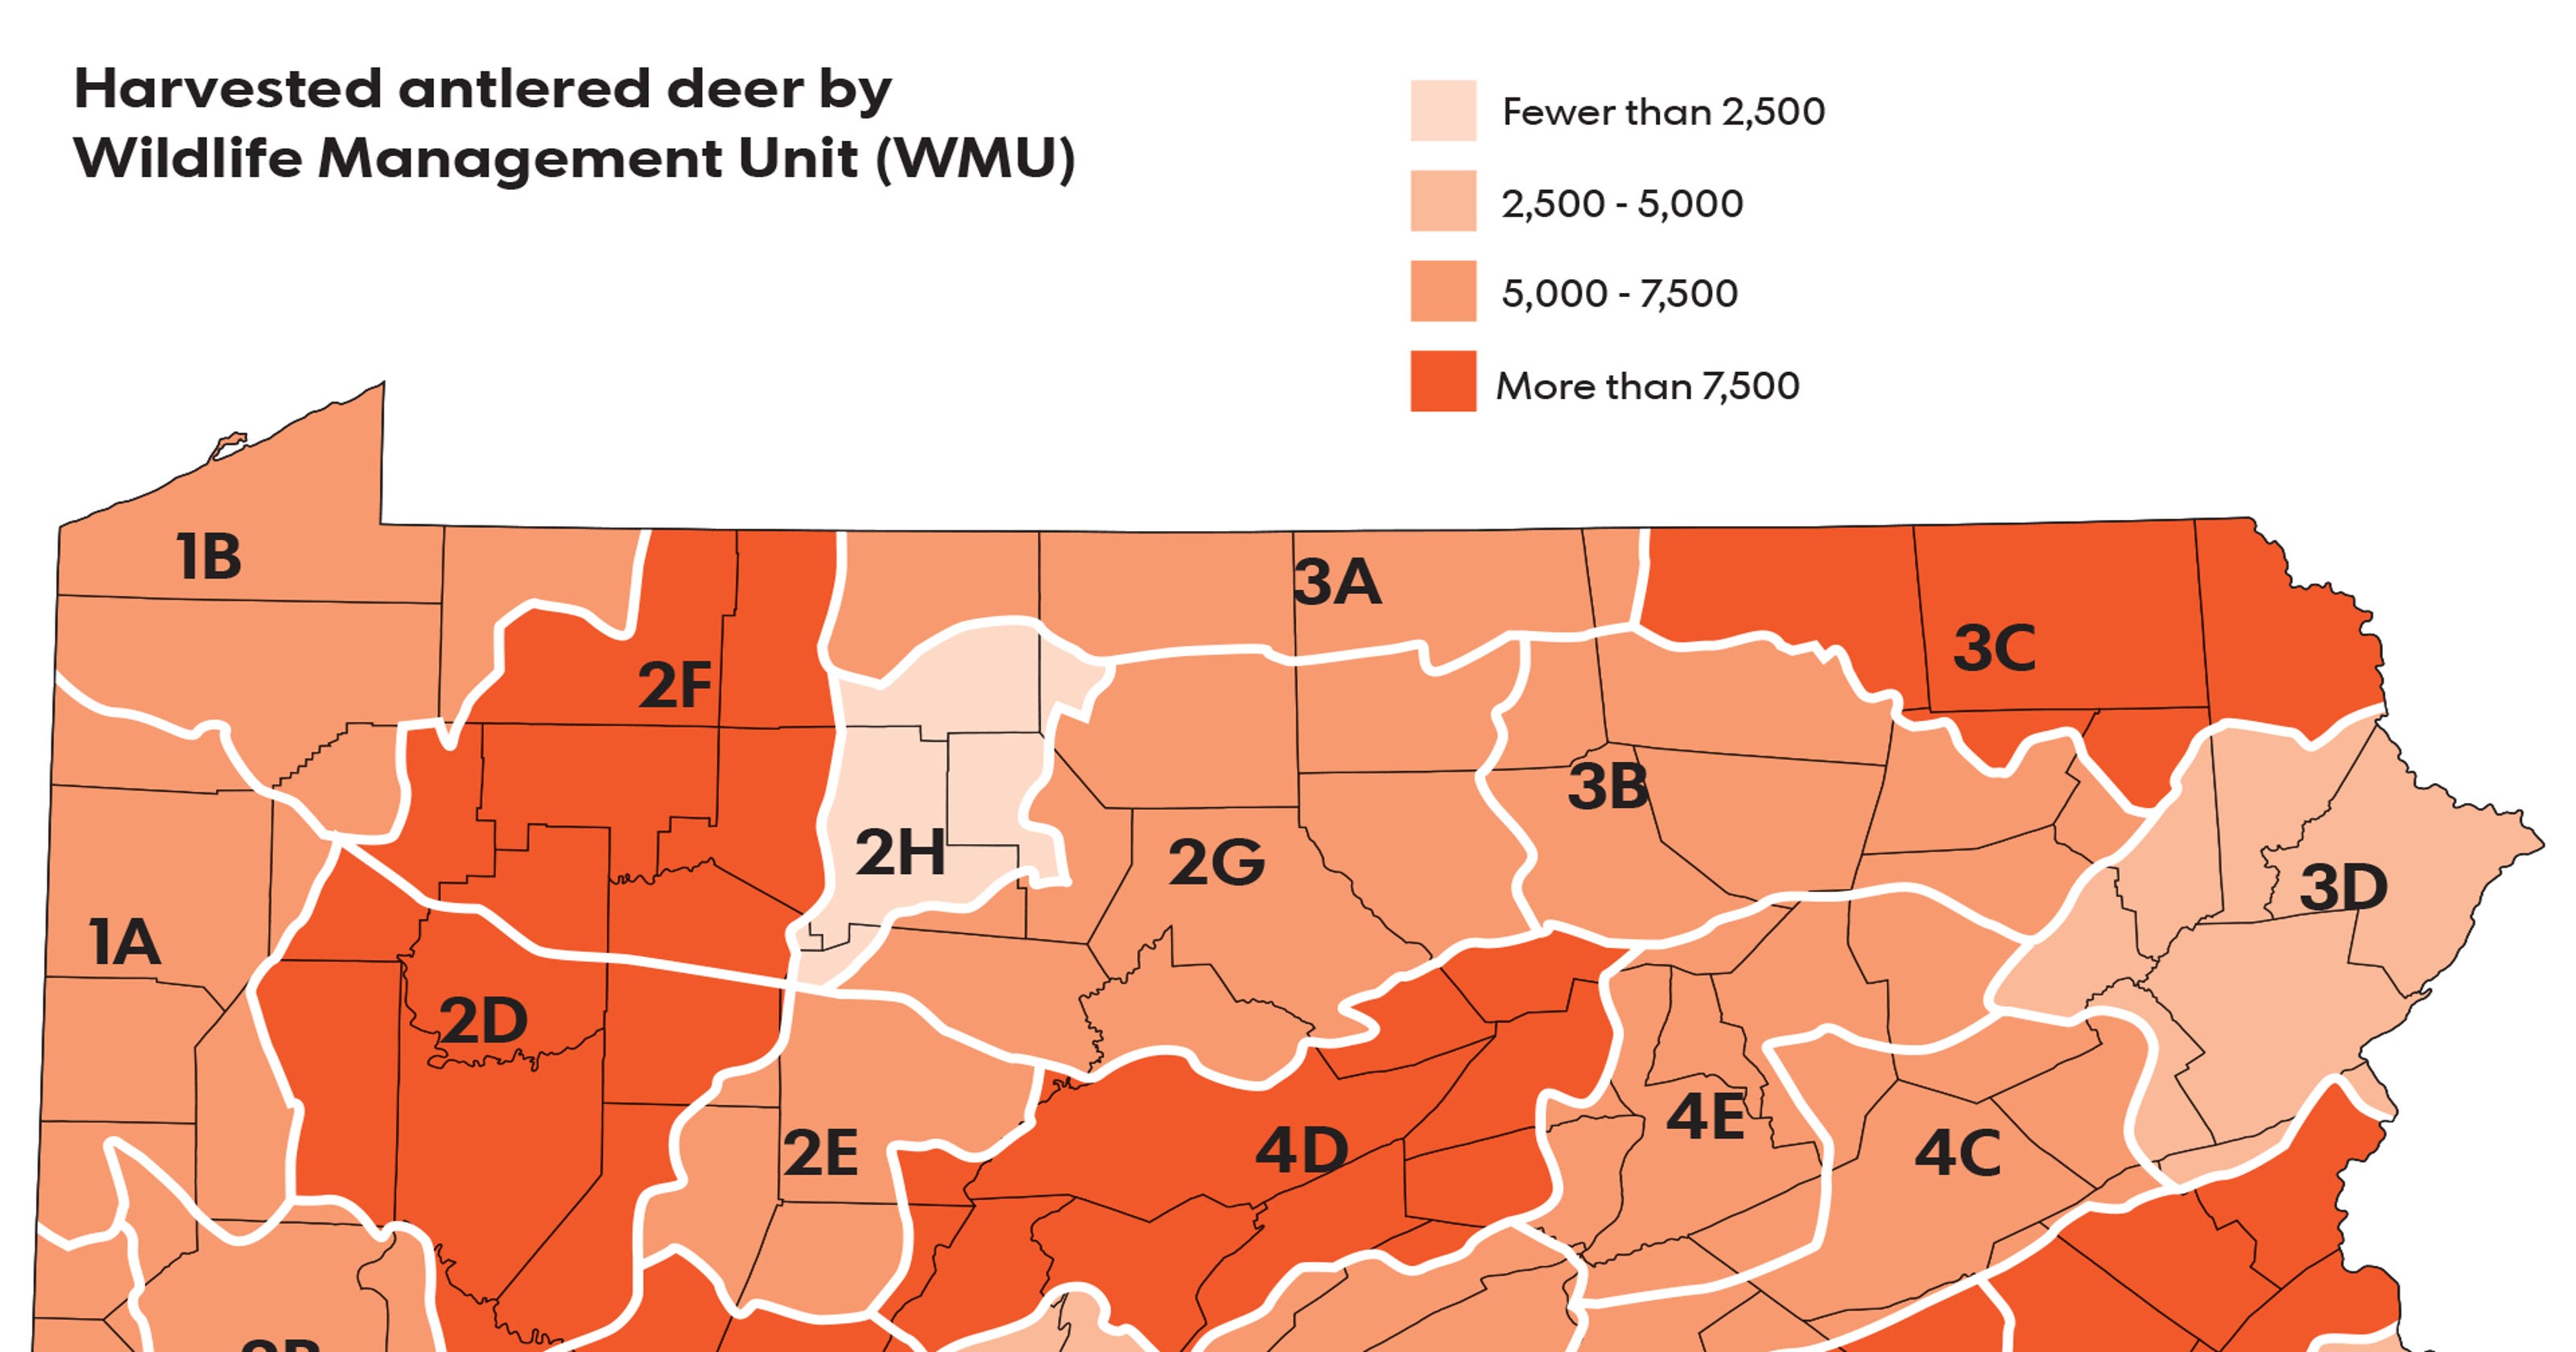 How many deer were harvested in Pa.?